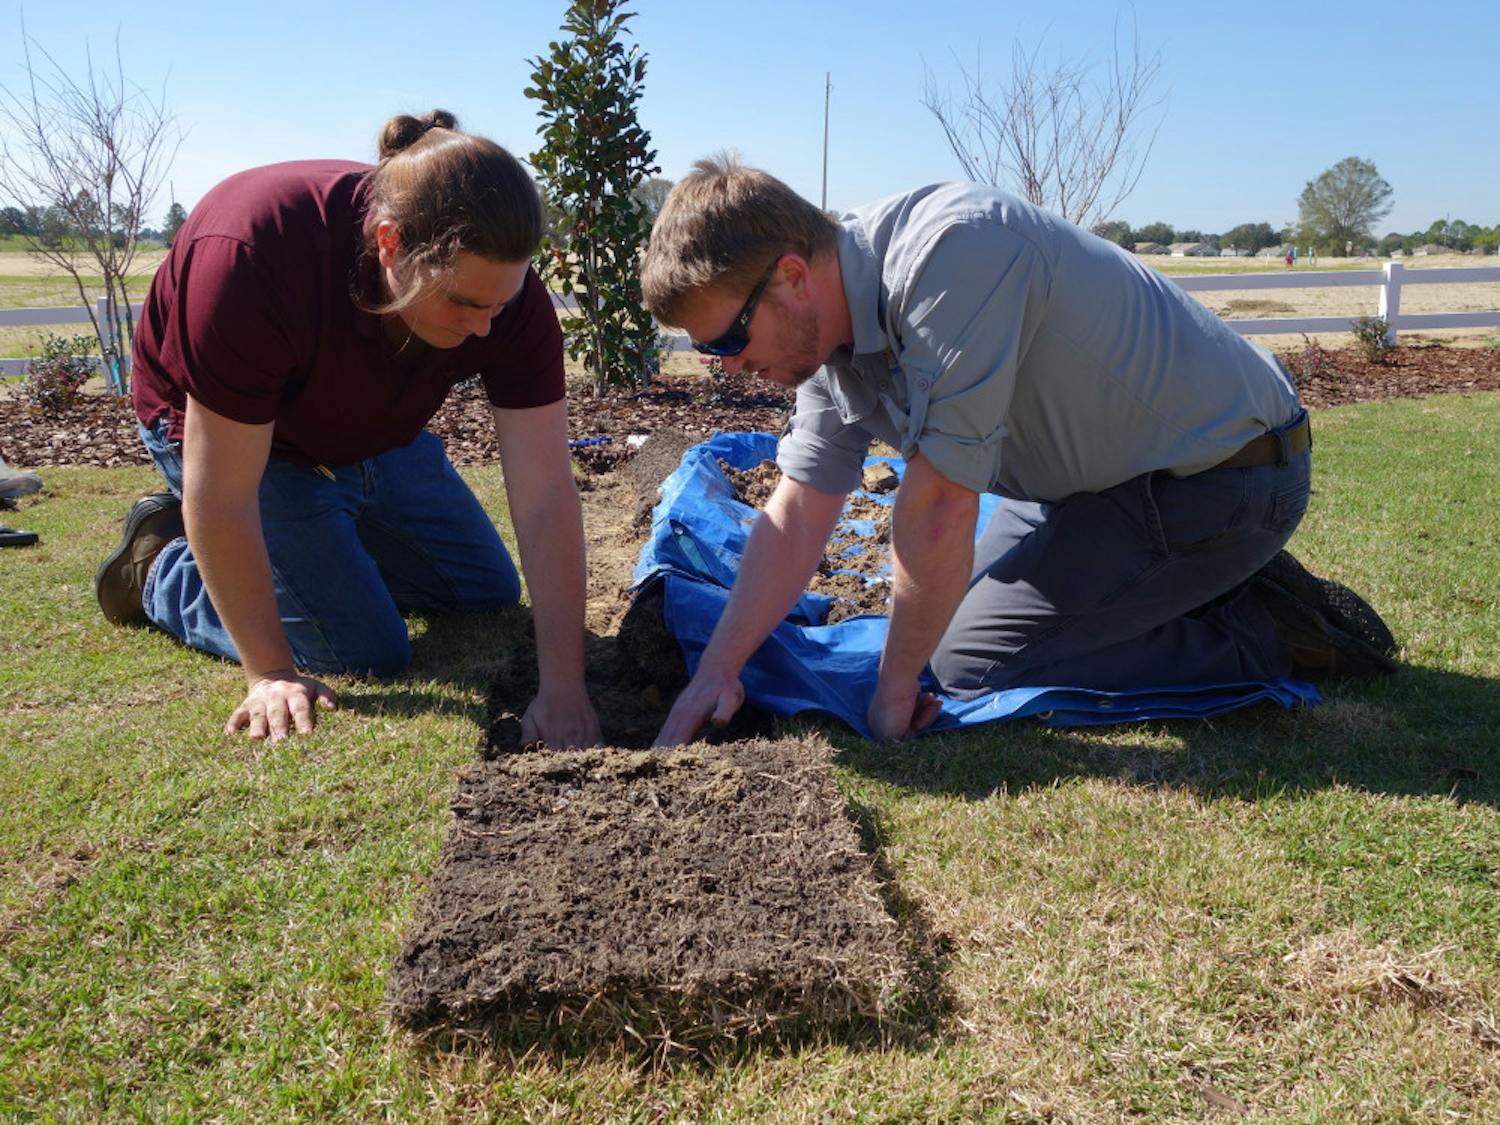 Eban Bean, lead researcher on the team, and Marc Thomas, a student studying agricultural and biological engineering, lay out compost. The team is researching whether compost can reduce the amount of water used for residential lawns.